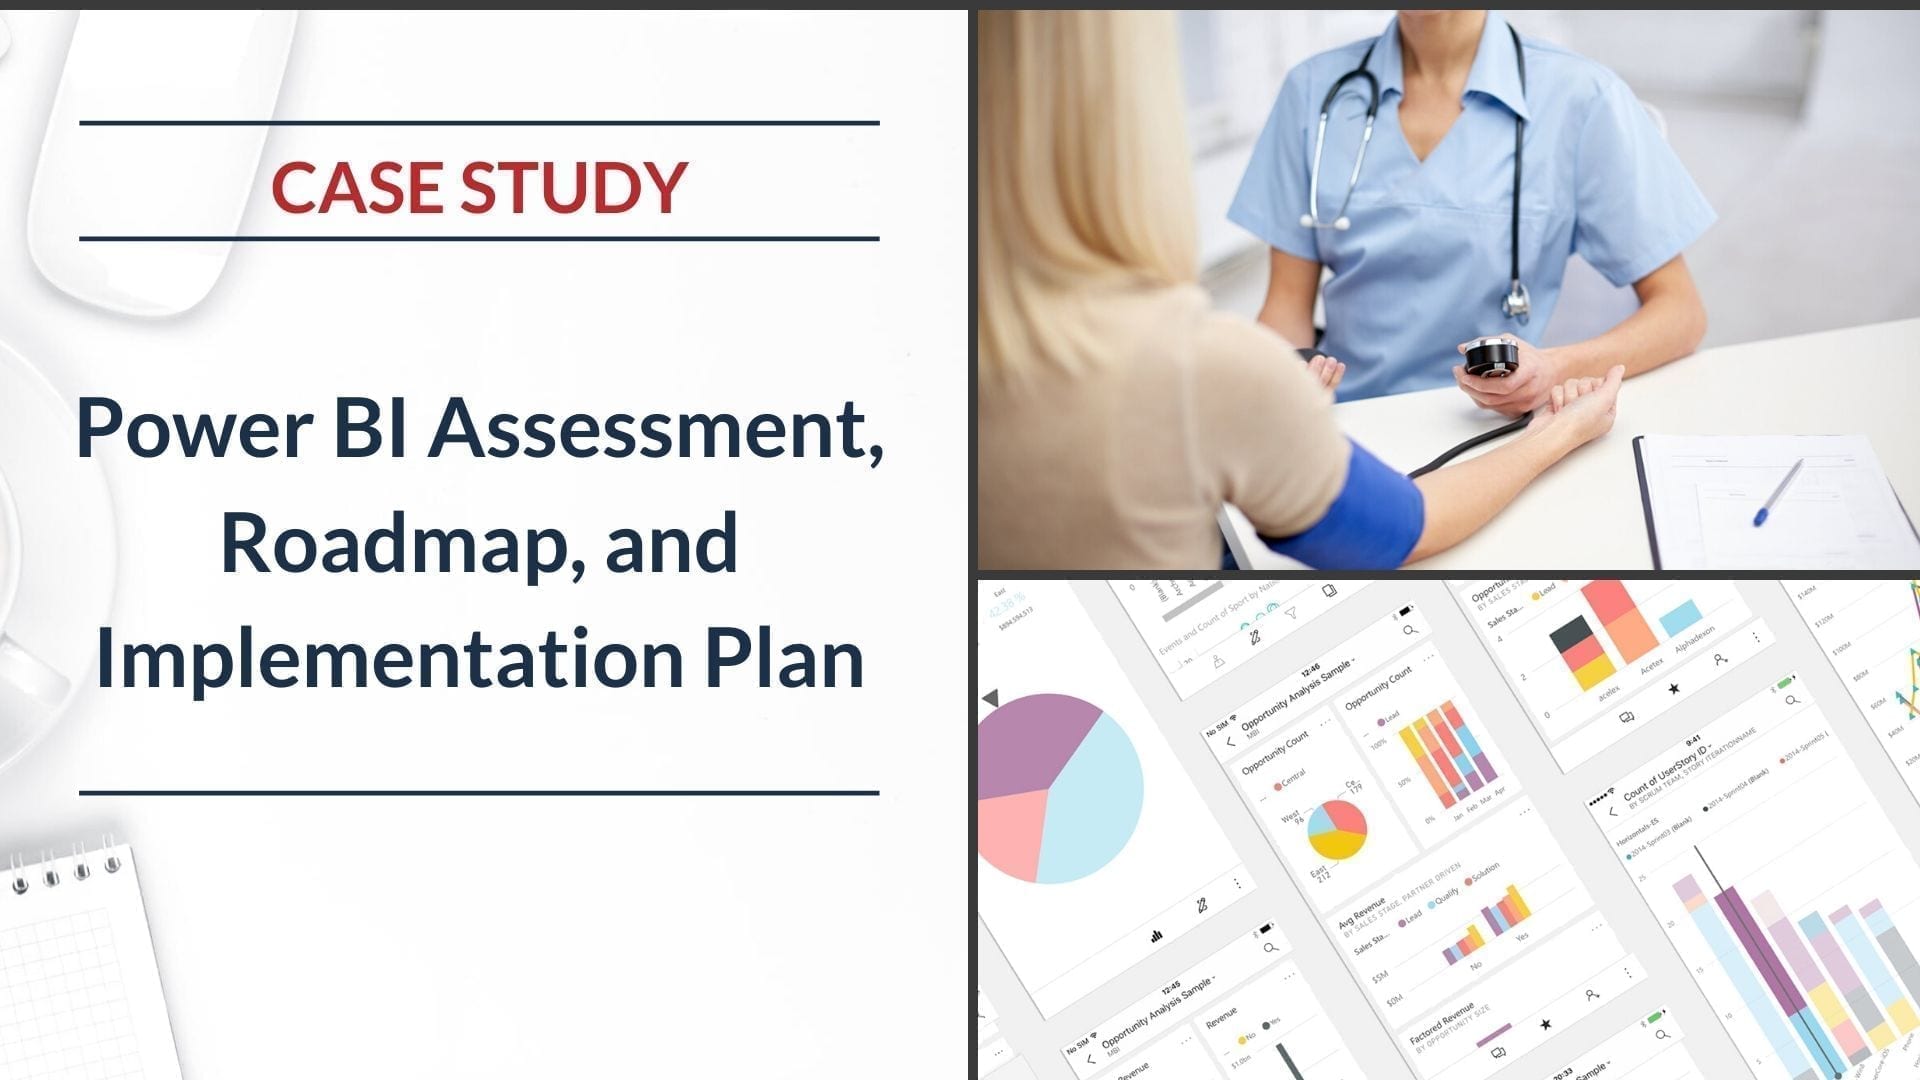 Case Study-Healthcare-PowerBI Assessment and Roadmap